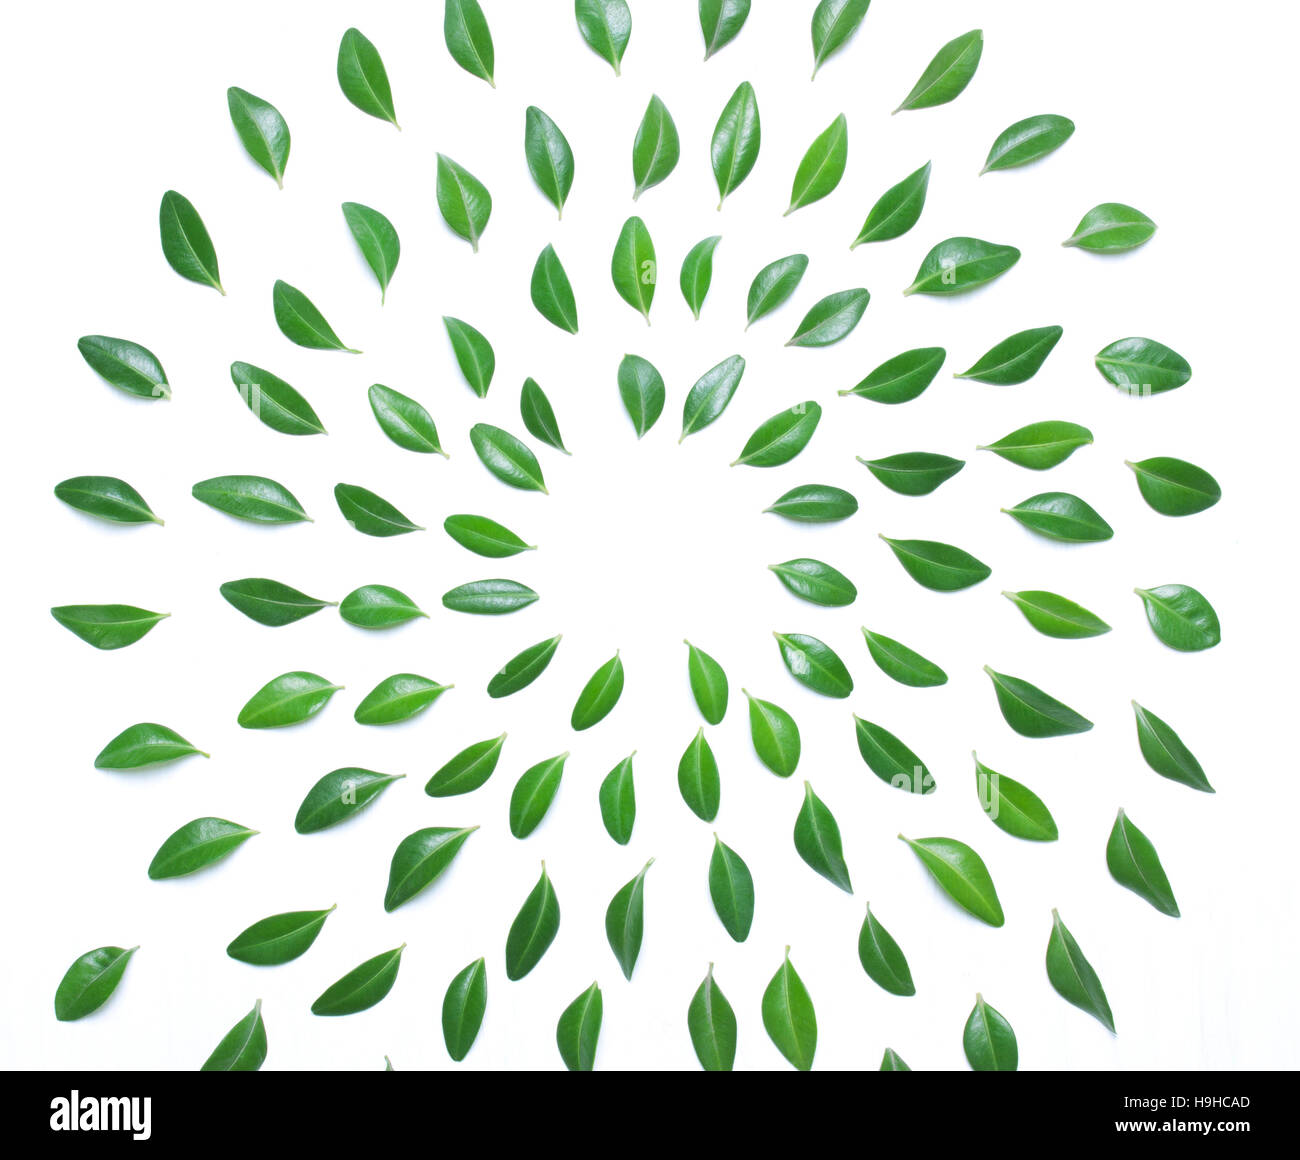 The spiral design of green leaves on a white background, top view, flat Stock Photo